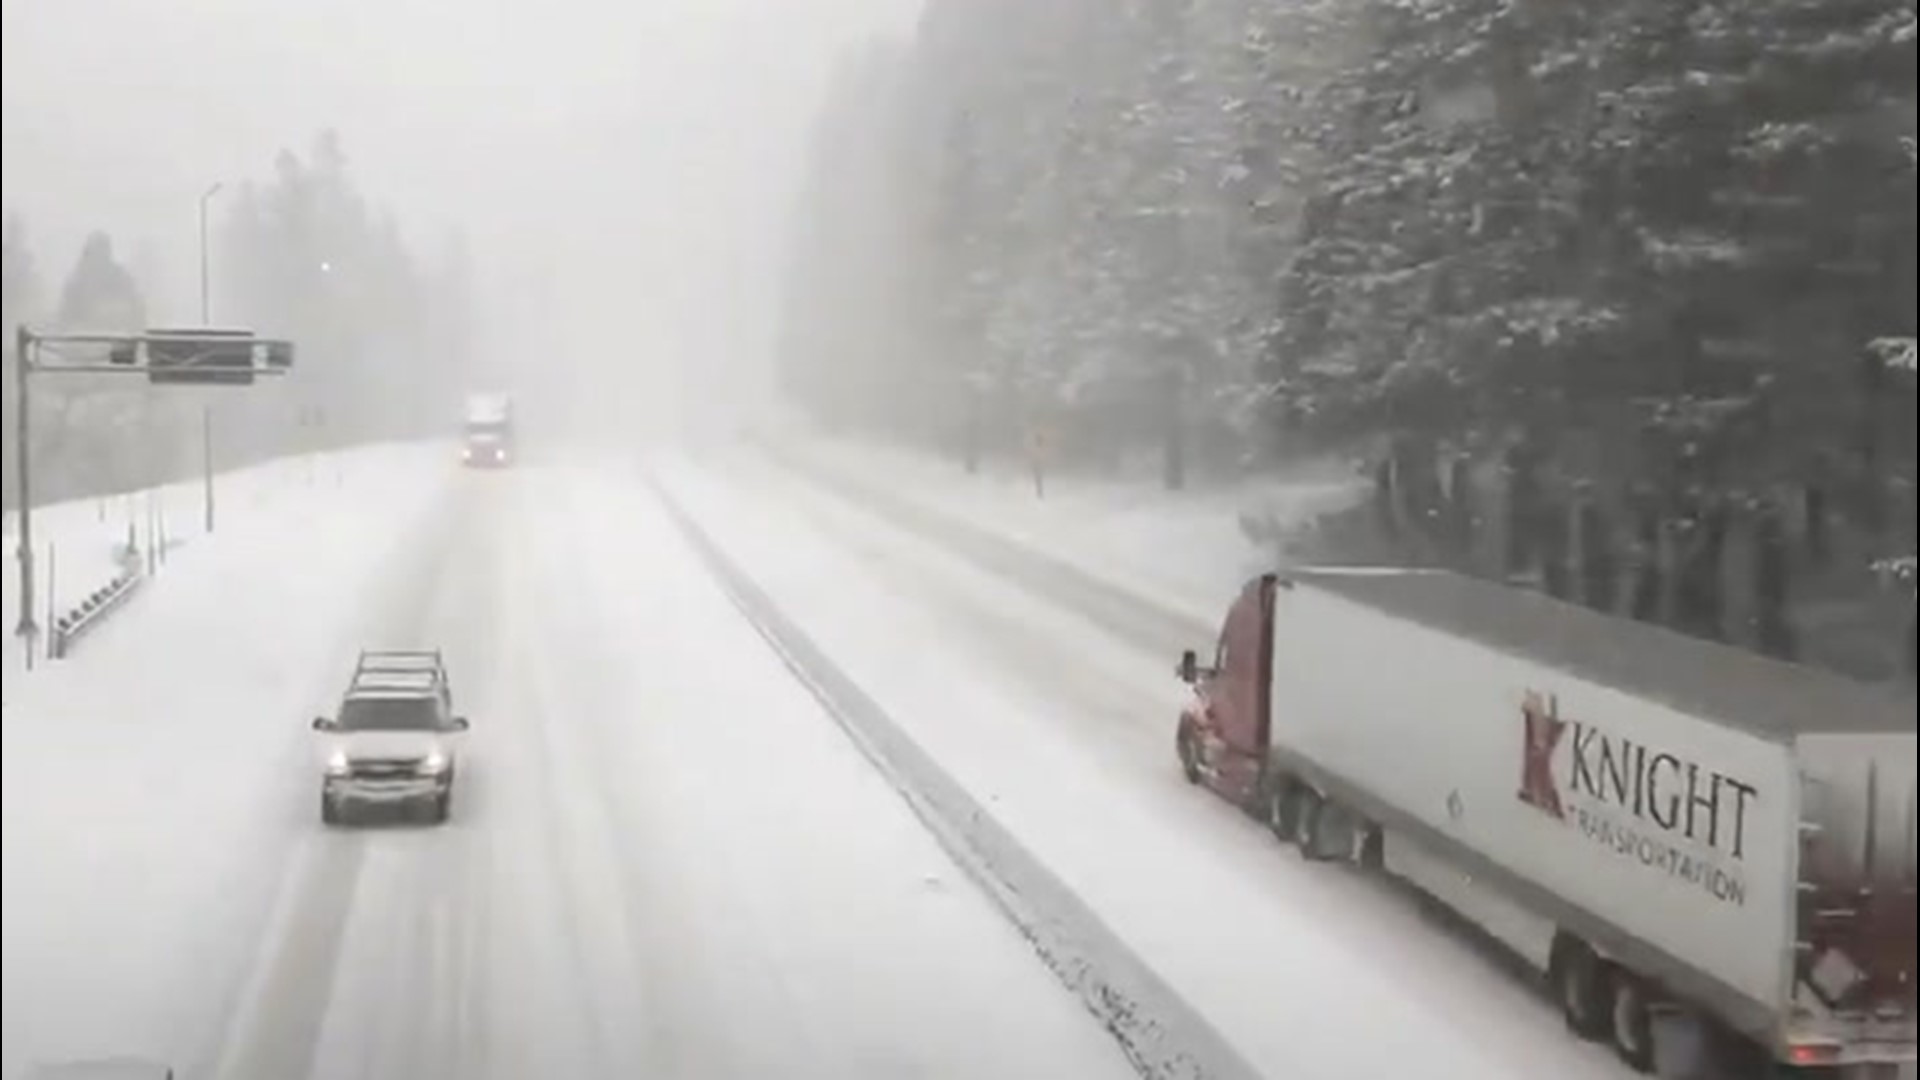 With low-elevation snow battering Interstate 80 in Placer County, California, on Jan. 16, tire chains were a requirement if you wanted a safe drive.